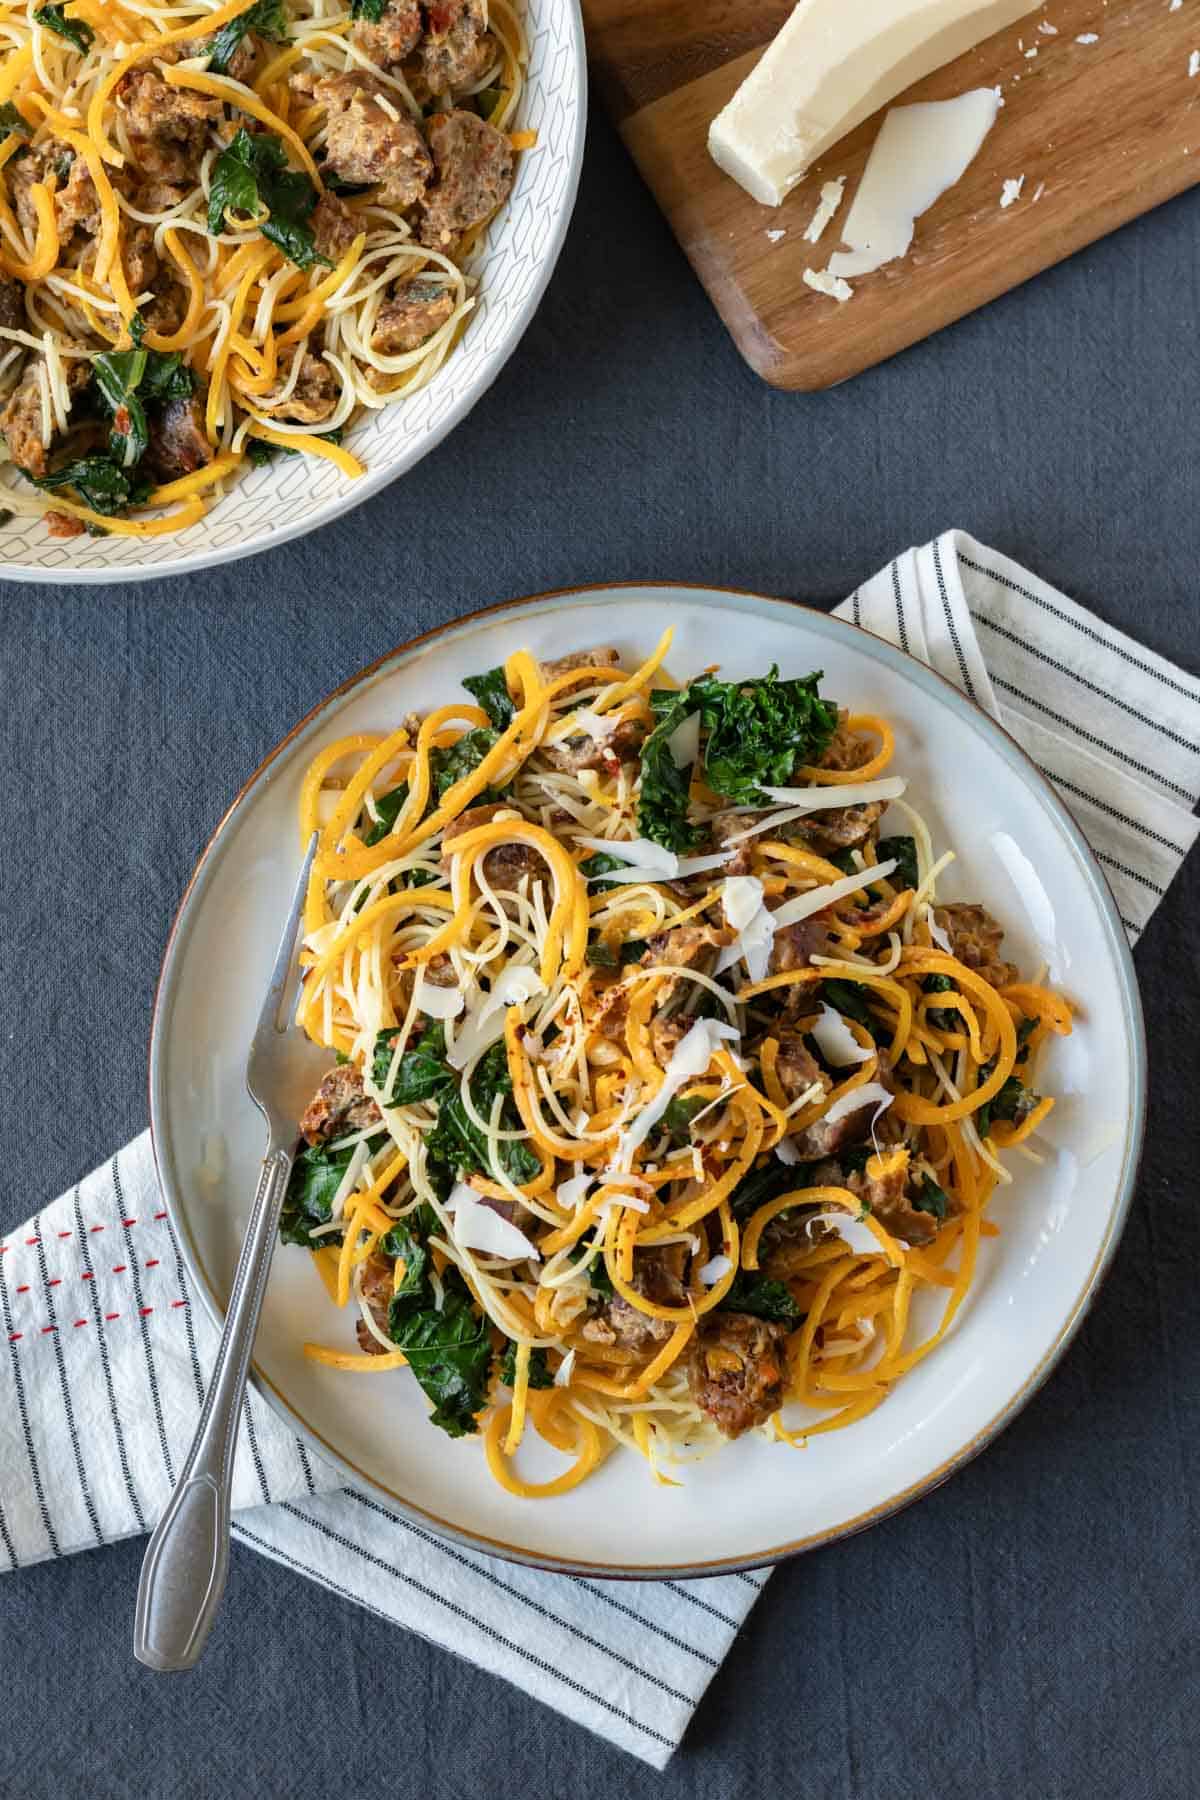 Spiralized butternut squash noodles with angel hair and vegetables on a plate.